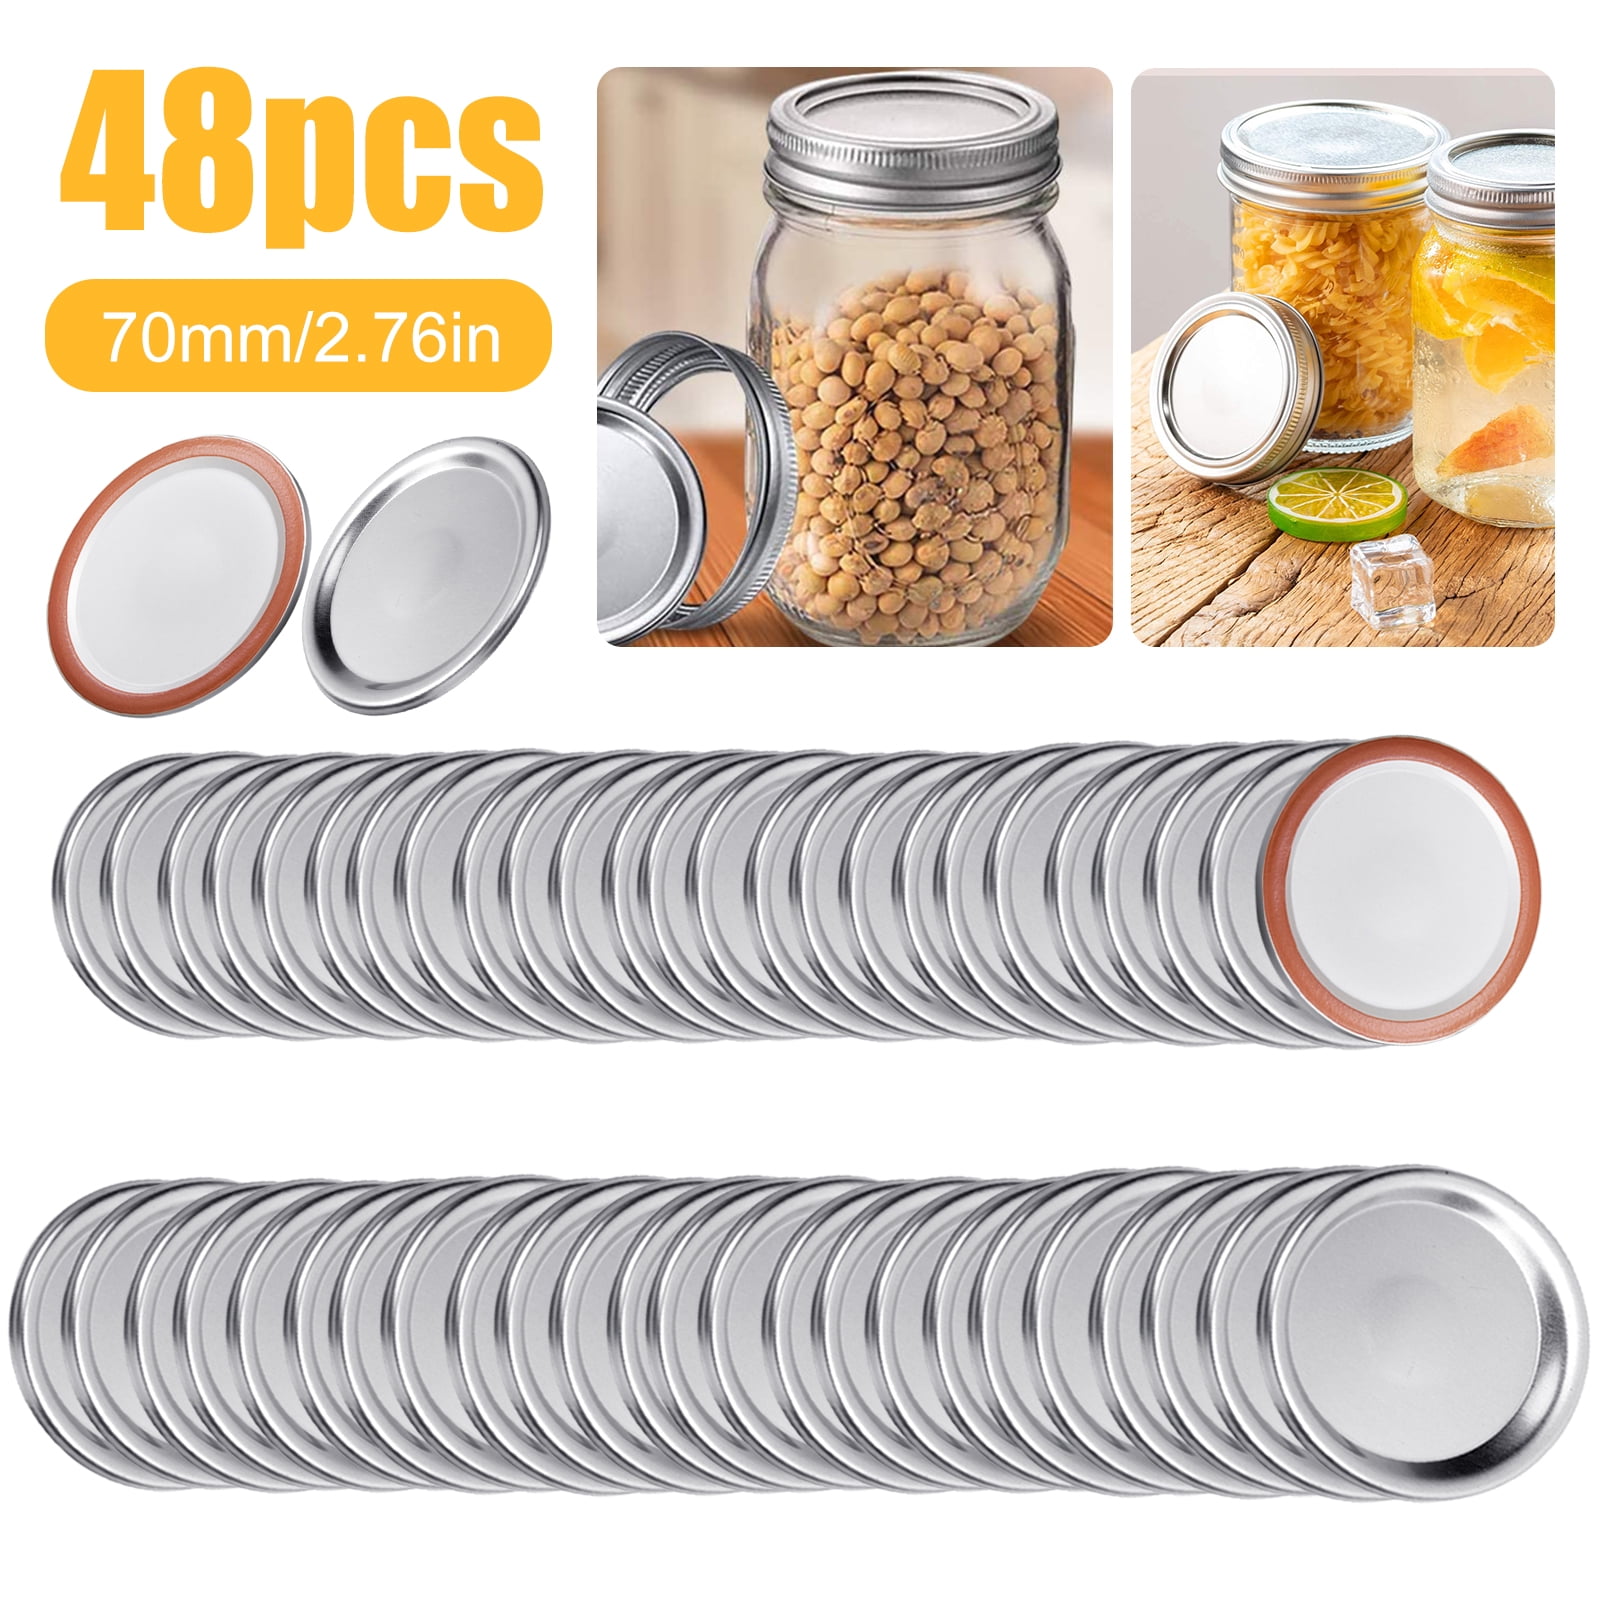 70mm Mason Jar Lids & Rings for Ball Mason Jars Leak Proof Storage Can Covers Caps for Canning Split-Type Silver Canning Jar Lids 50 Pieces Regular Mouth Canning Lids Gold,70mm 